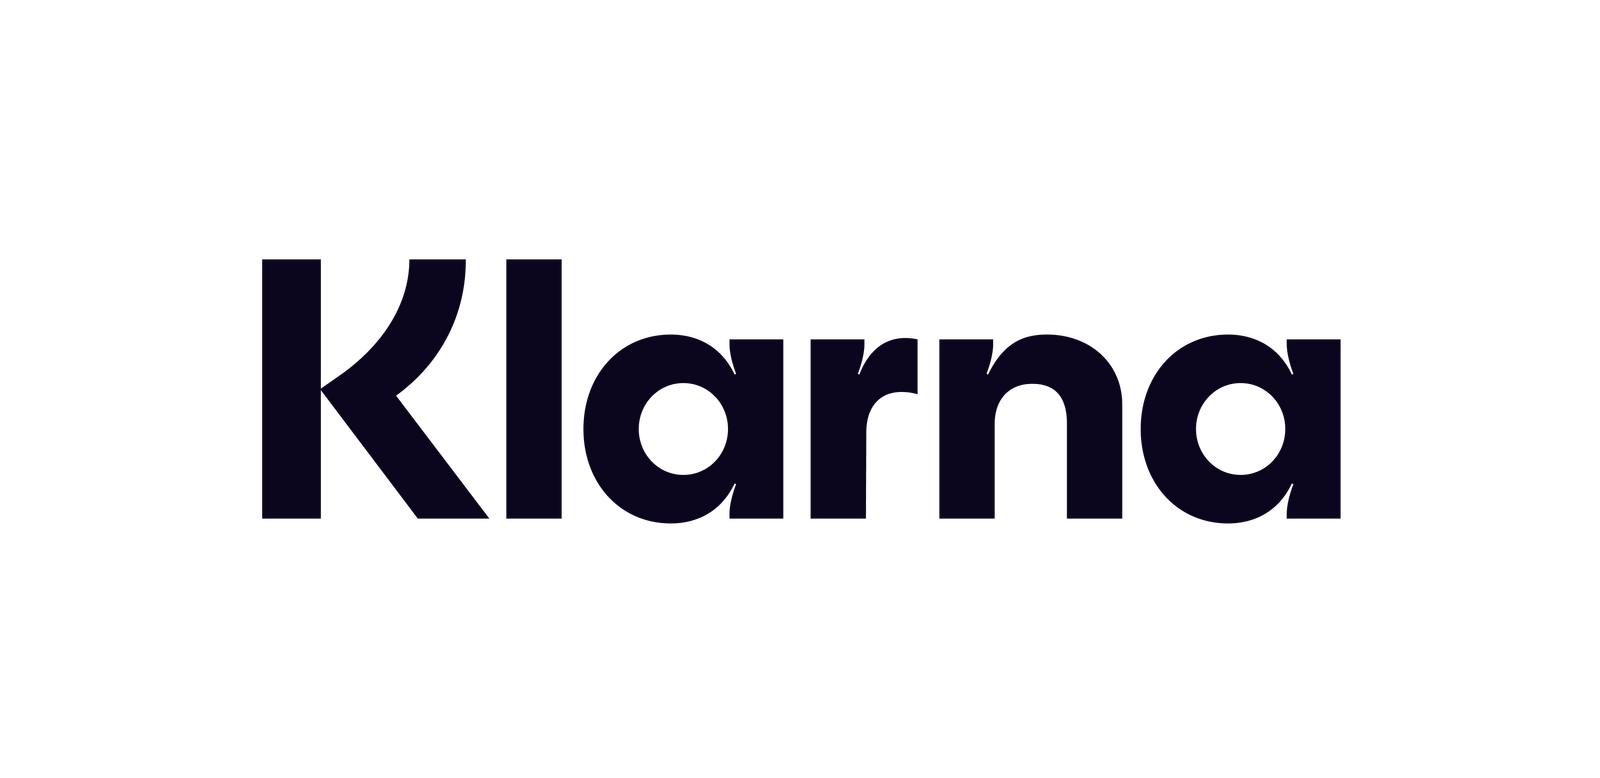 Pay safely with Klarna